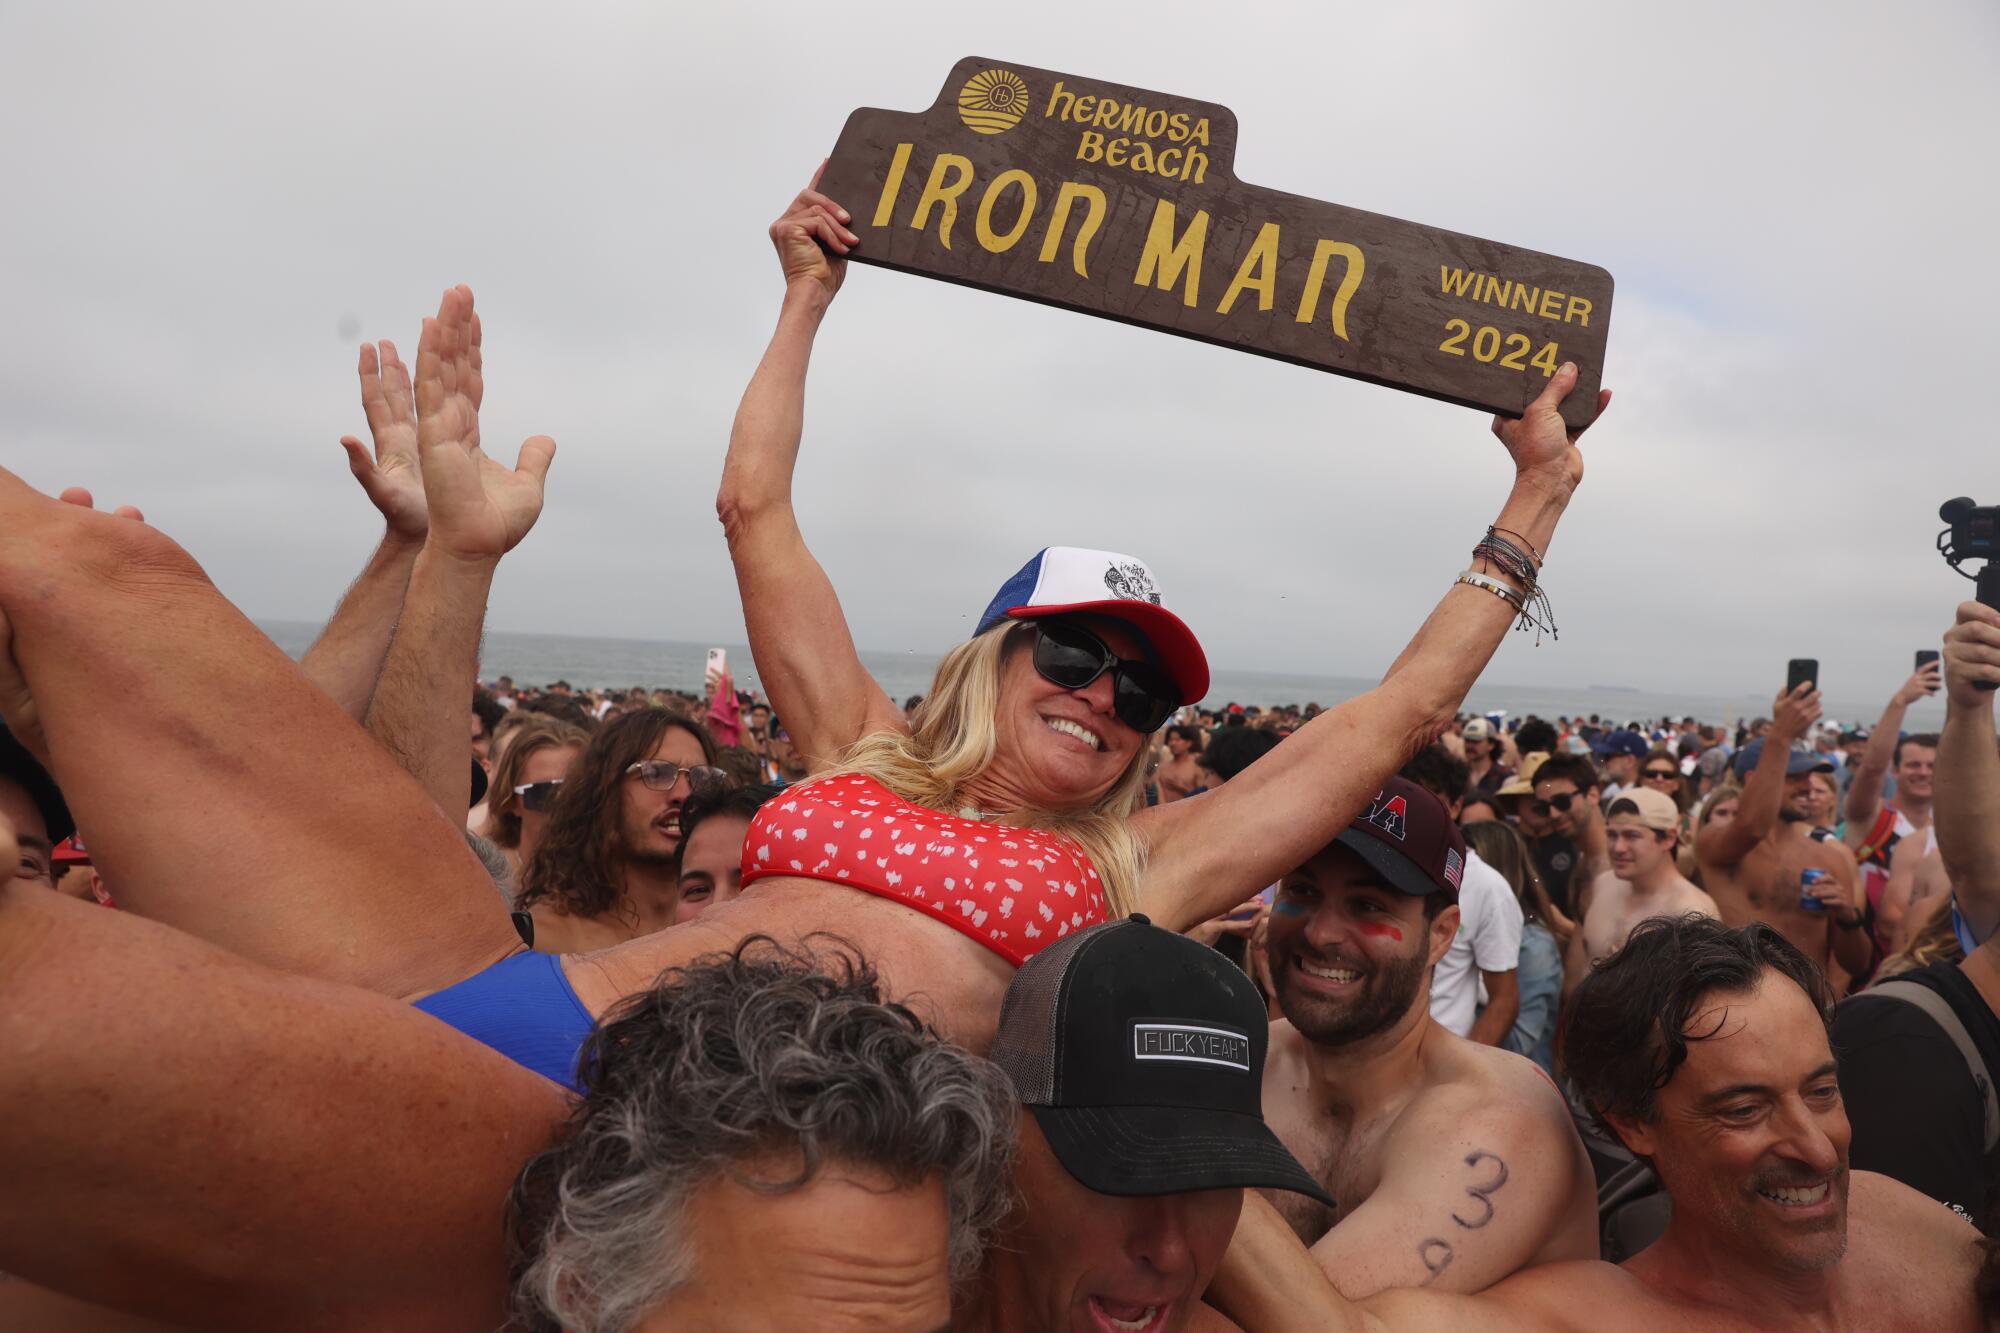 A woman holds a sign that reads "Iron Man" as she is lifted into the air by many people.